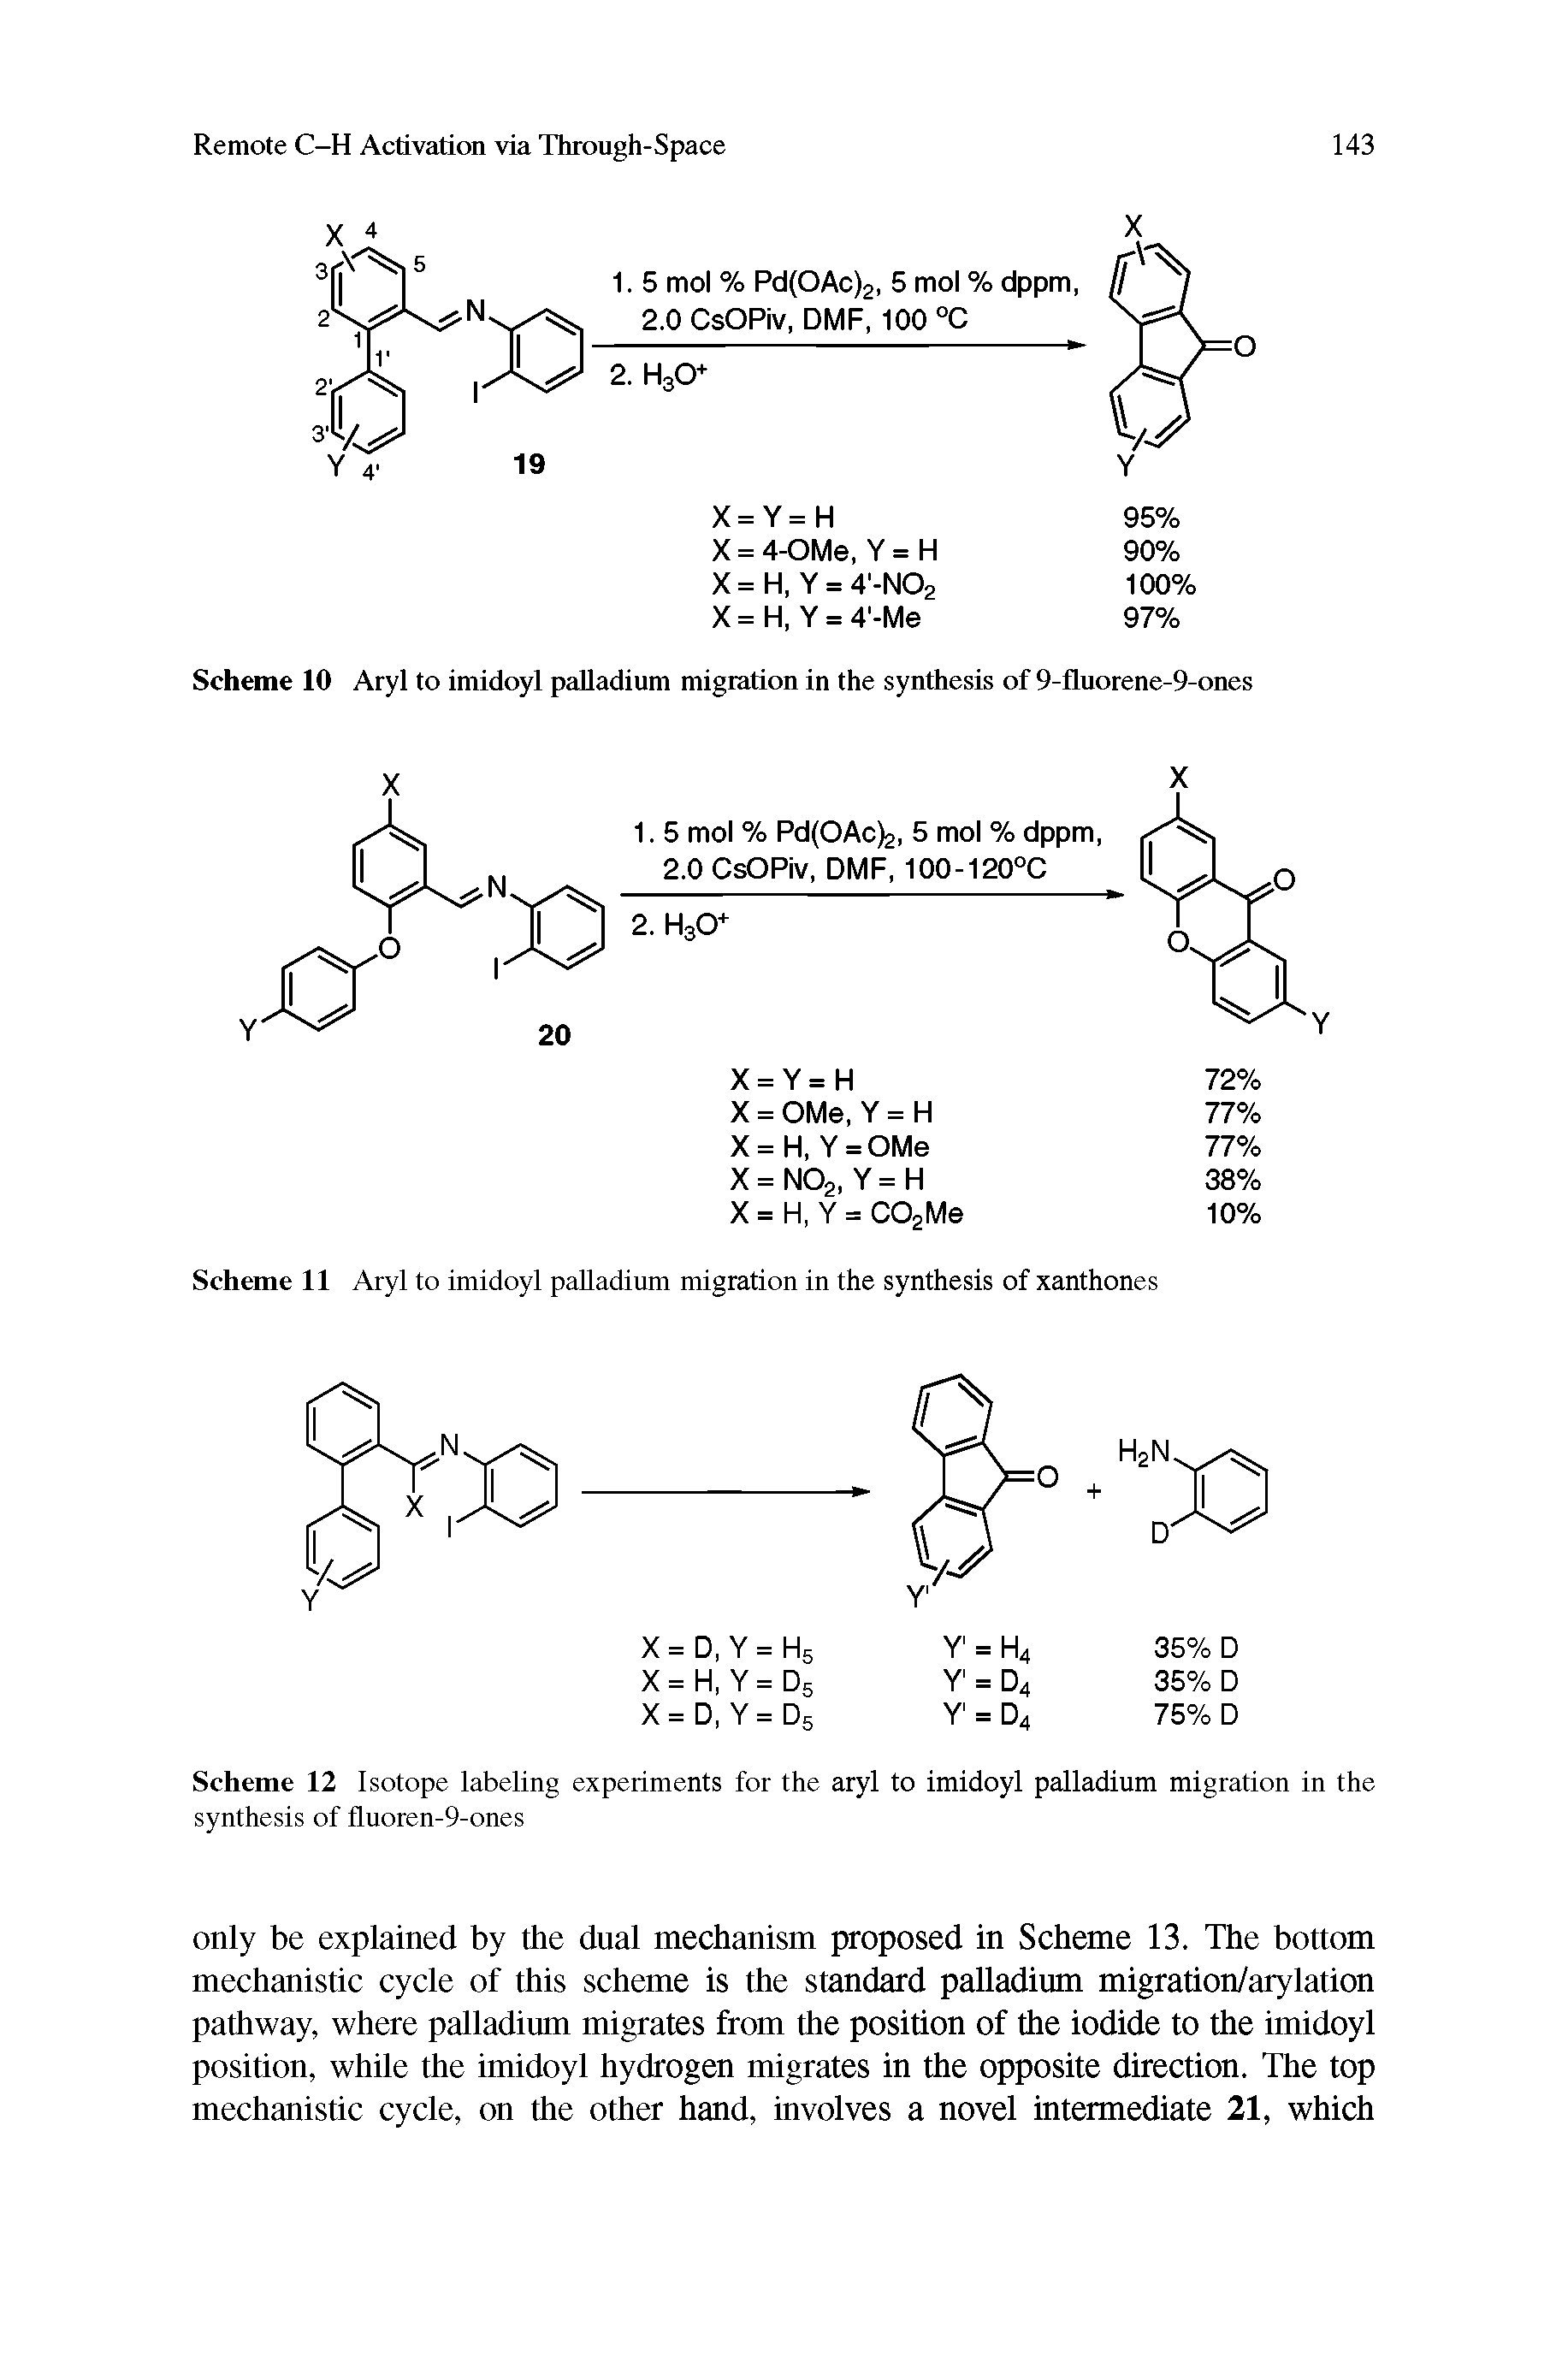 Scheme 10 Aryl to imidoyl palladium migration in the synthesis of 9-fluorene-9-ones...